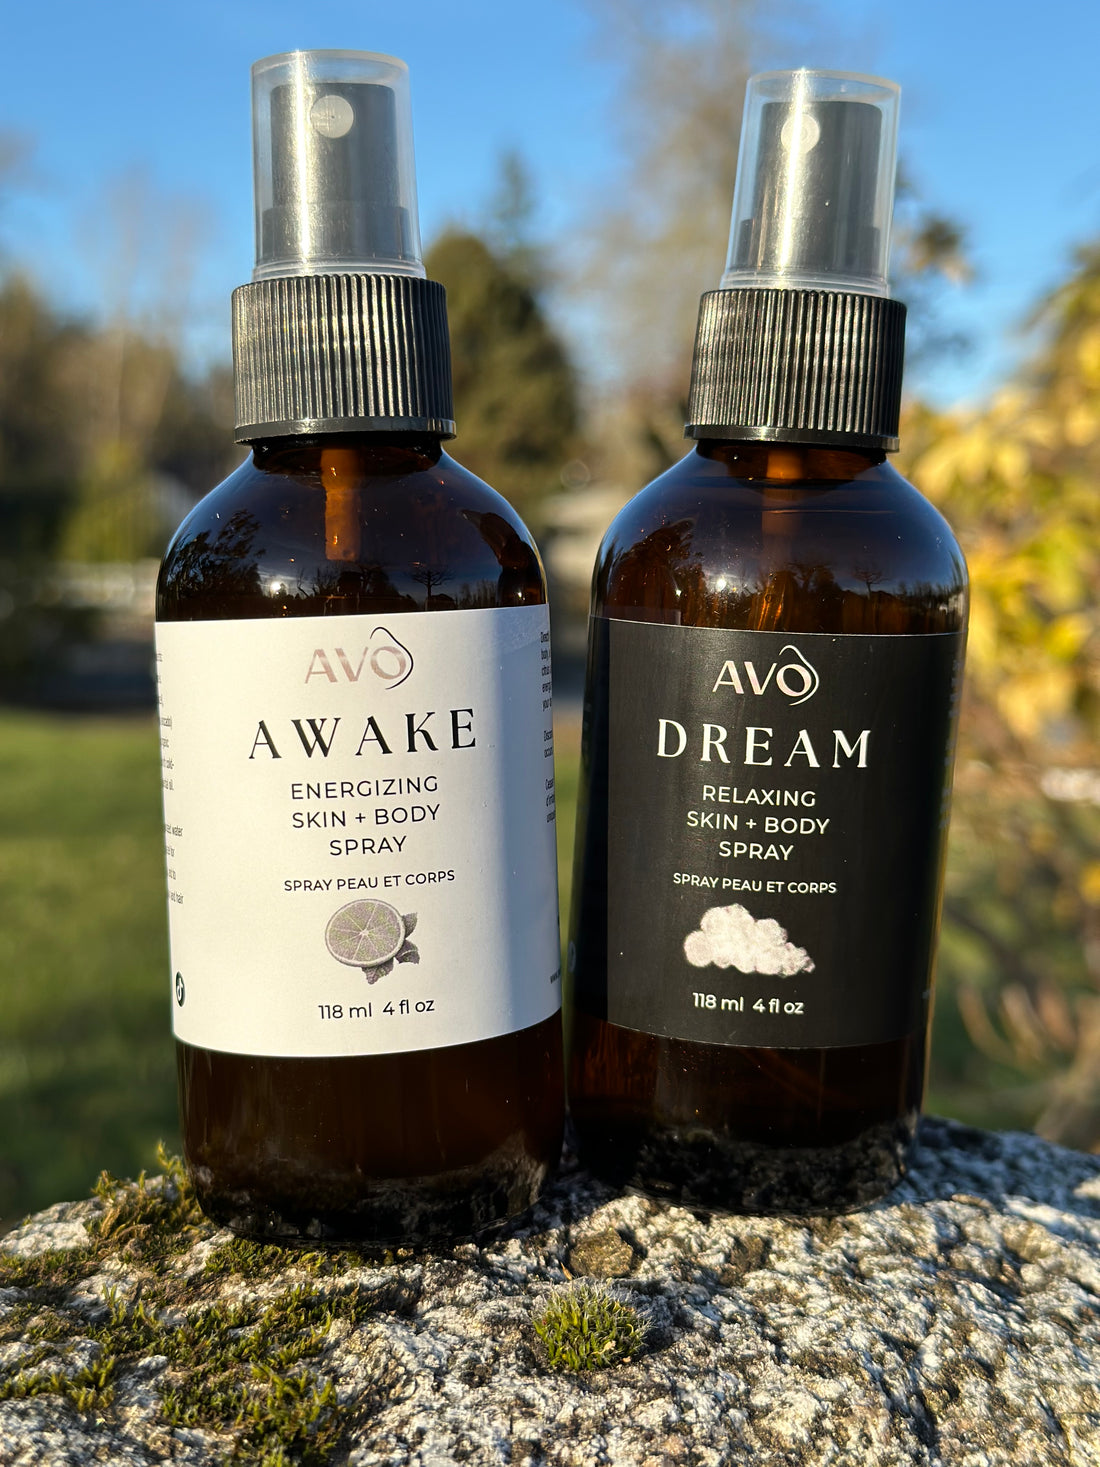 On the left is AWAKE Energizing Skin + Body Spray 4oz, On the Right DREAM Relaxing Skin + Body Spray 4oz, these Organic Remedies are both infused with essential oils